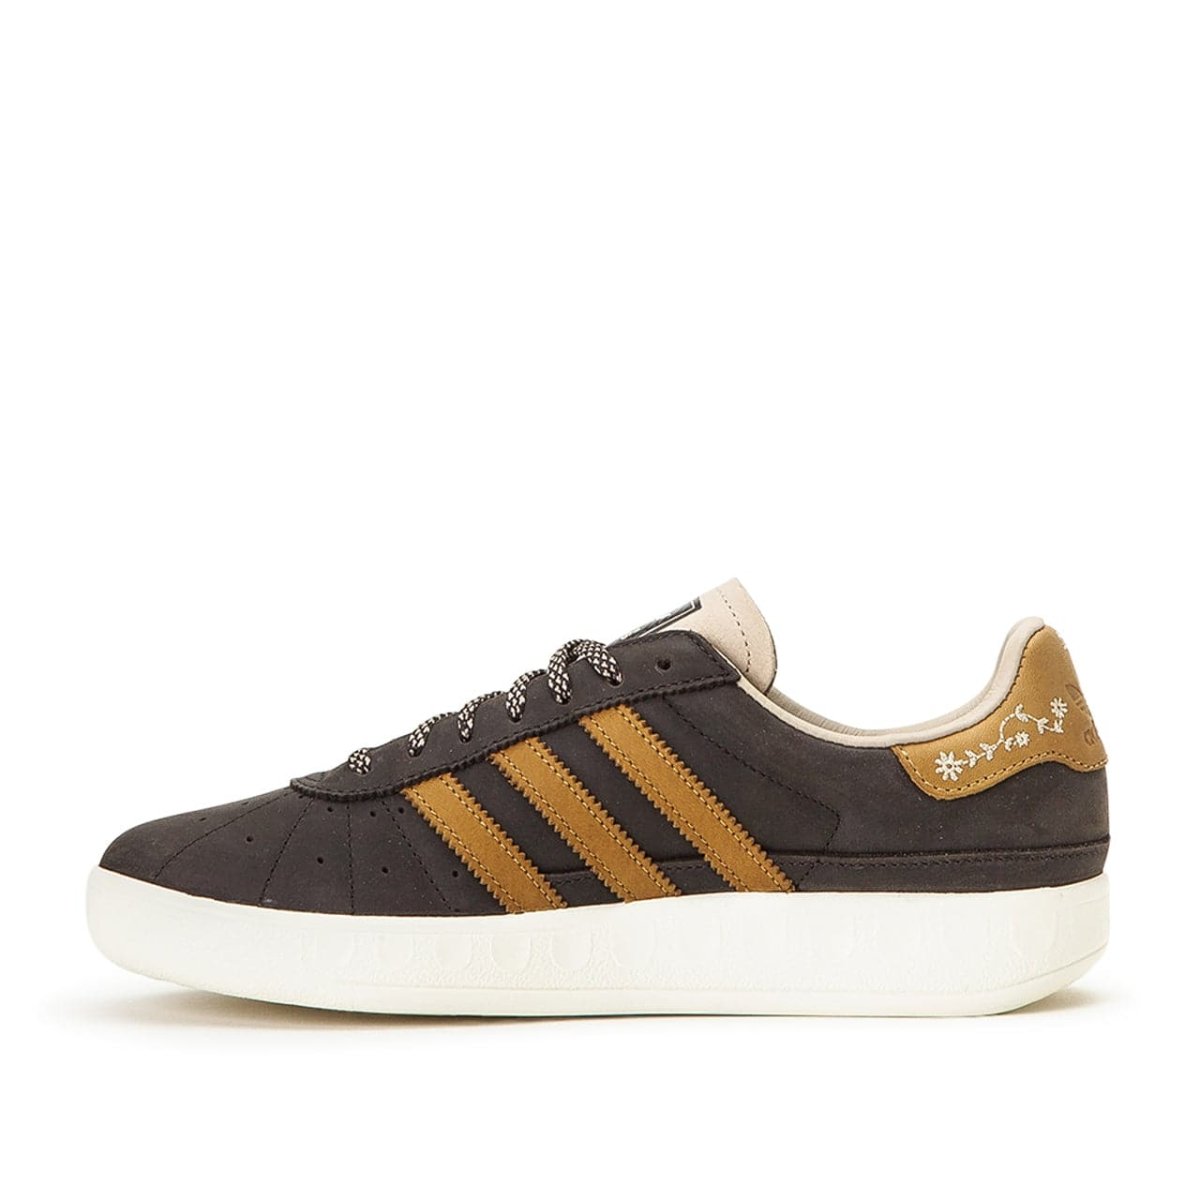 adidas 'Made in Germany - Oktoberfest' (Brown) BY9805 – Store